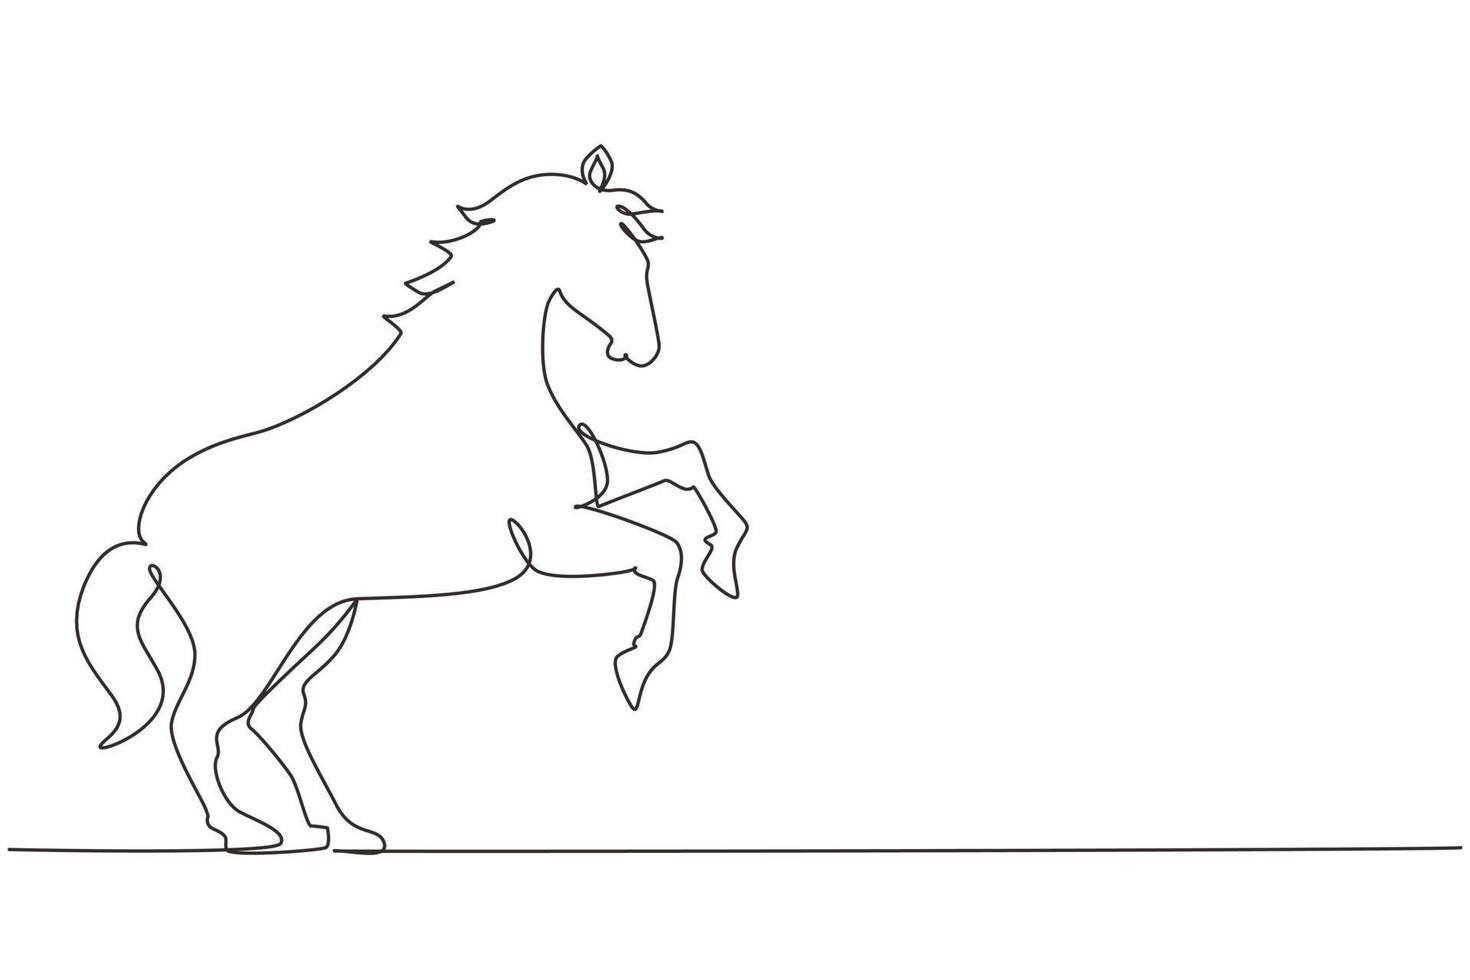 Single one line drawing proud white horse walks gracefully with its front hoof forward. Wild mustang gallops in free nature. Strong animal mascot. Modern continuous line draw design graphic vector